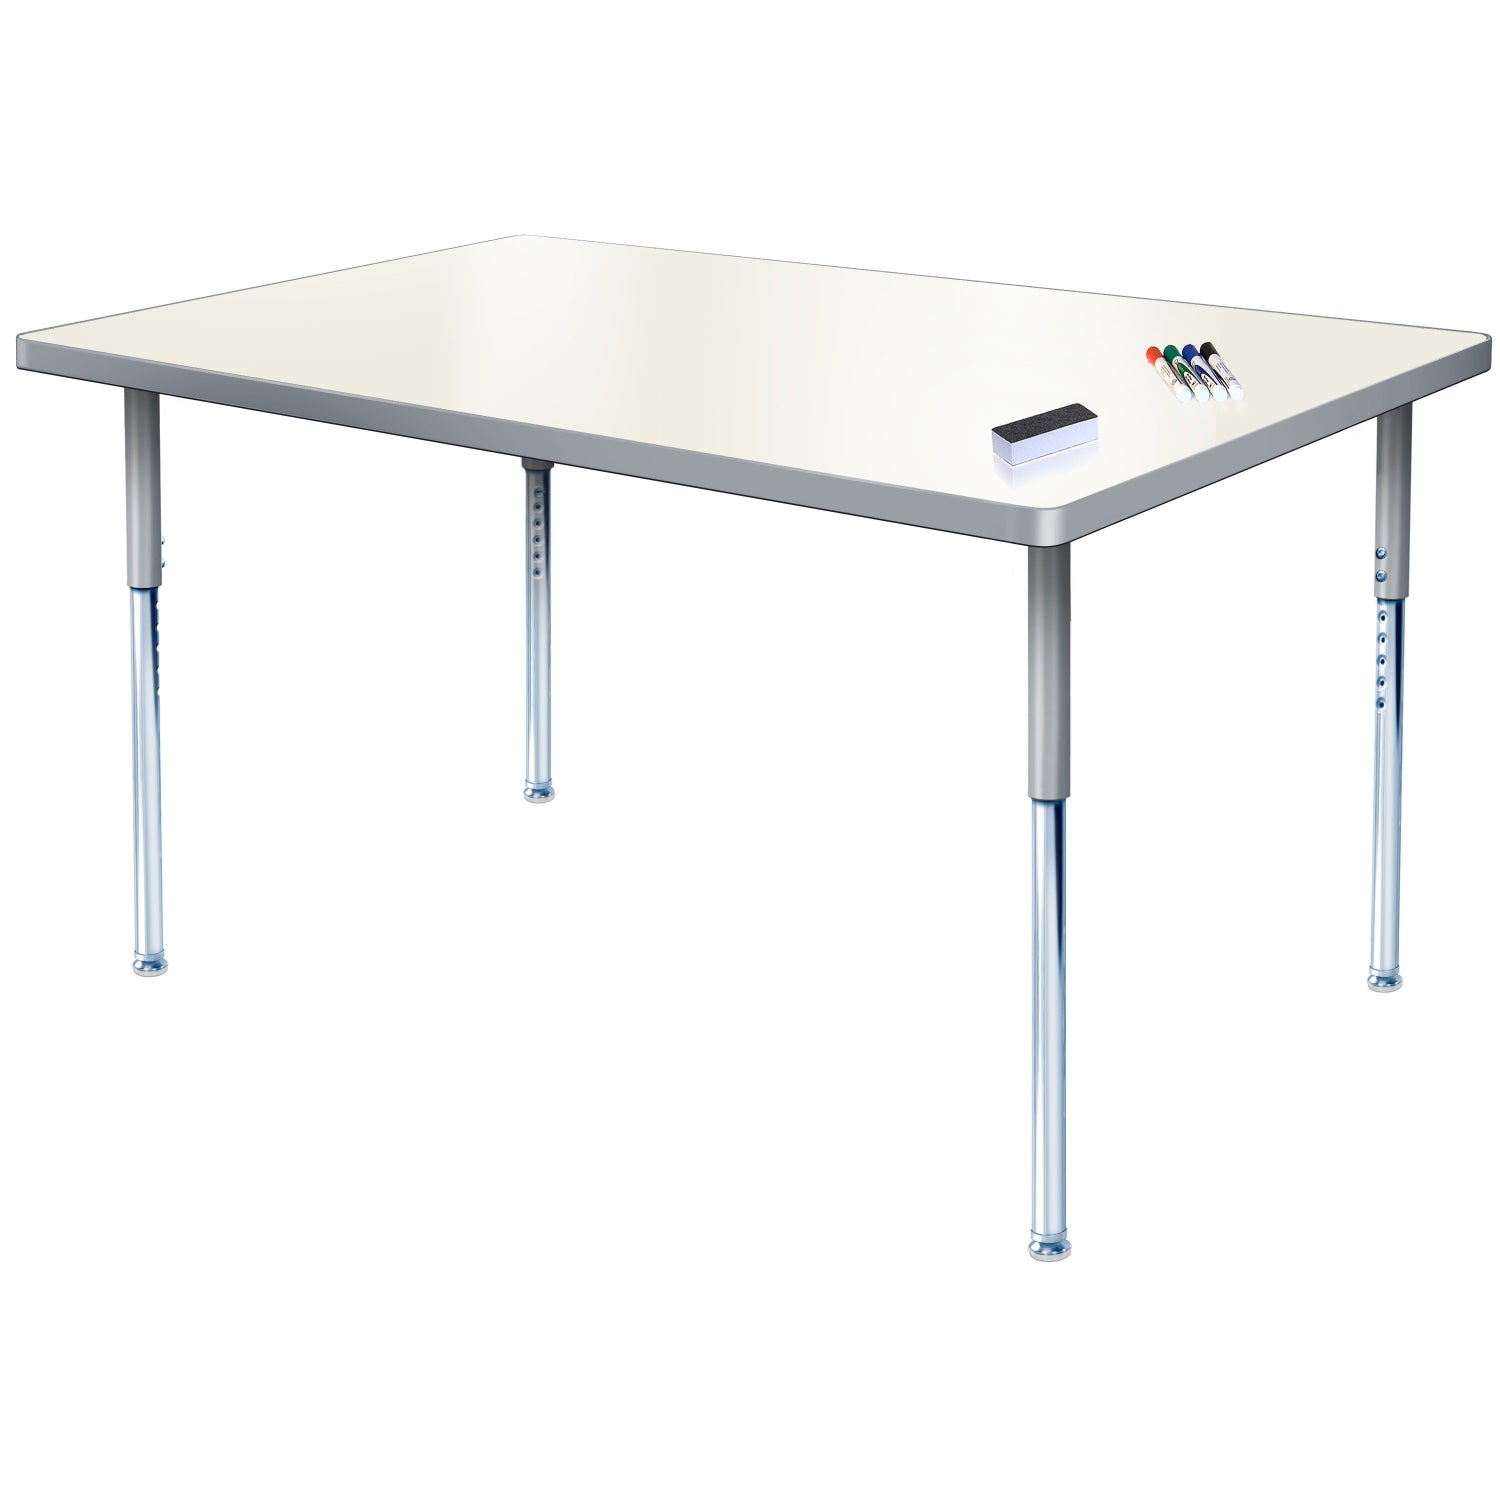 Imagination Station 36 x 60" Rectangular Activity Table with Dry Erase Markerboard Top, Modern Classic Adjustable Height Legs